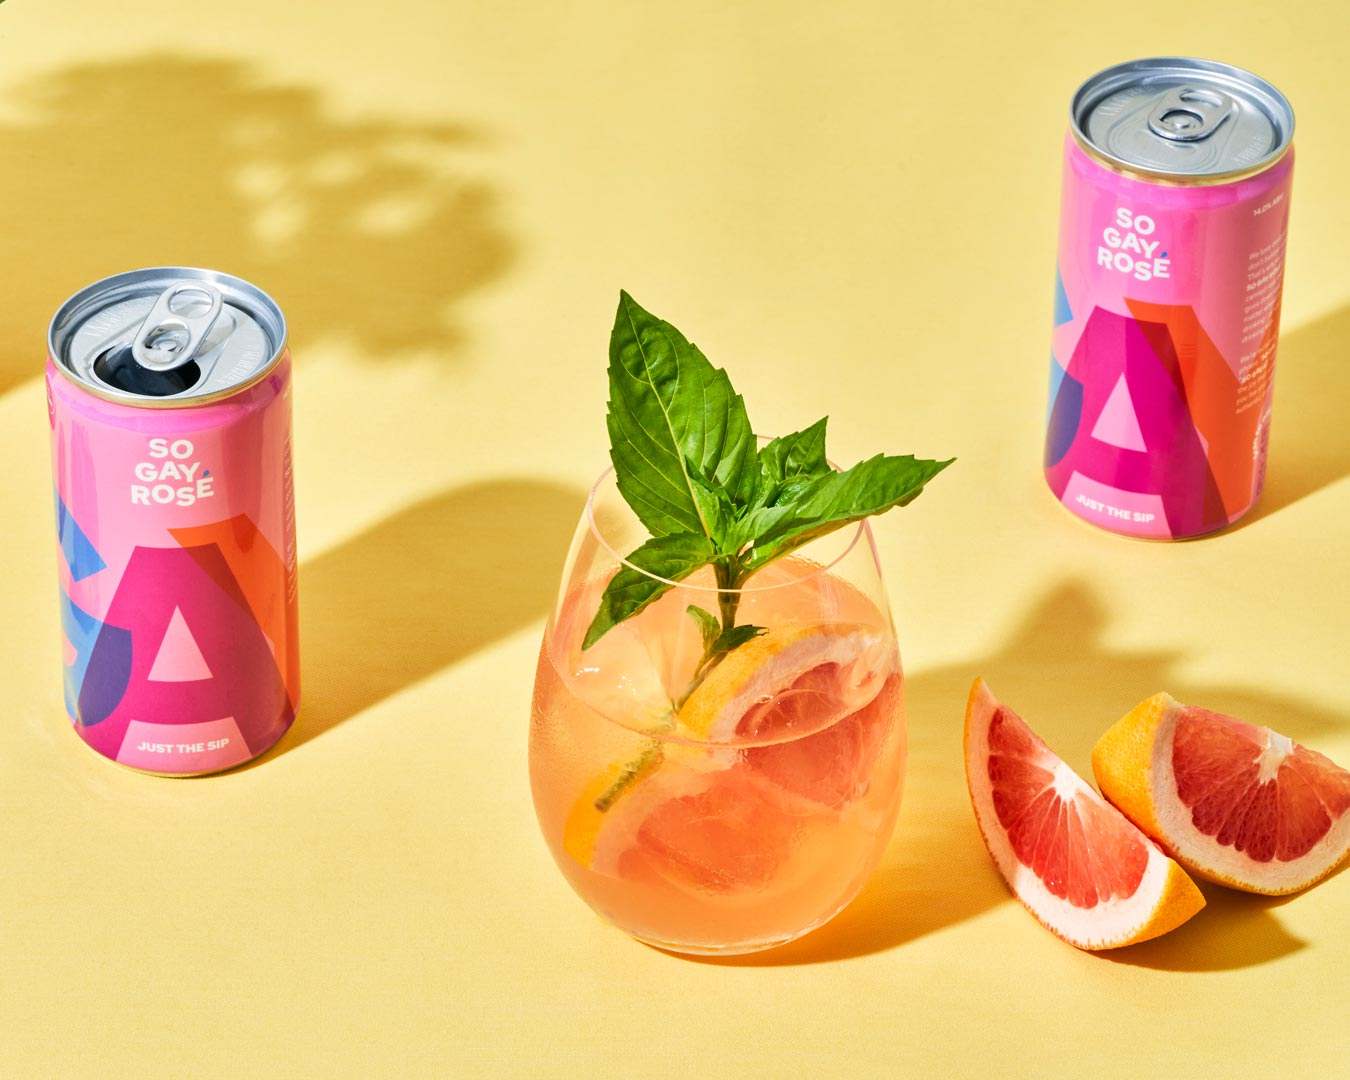 So Gay Rosè cans with drink and fruit